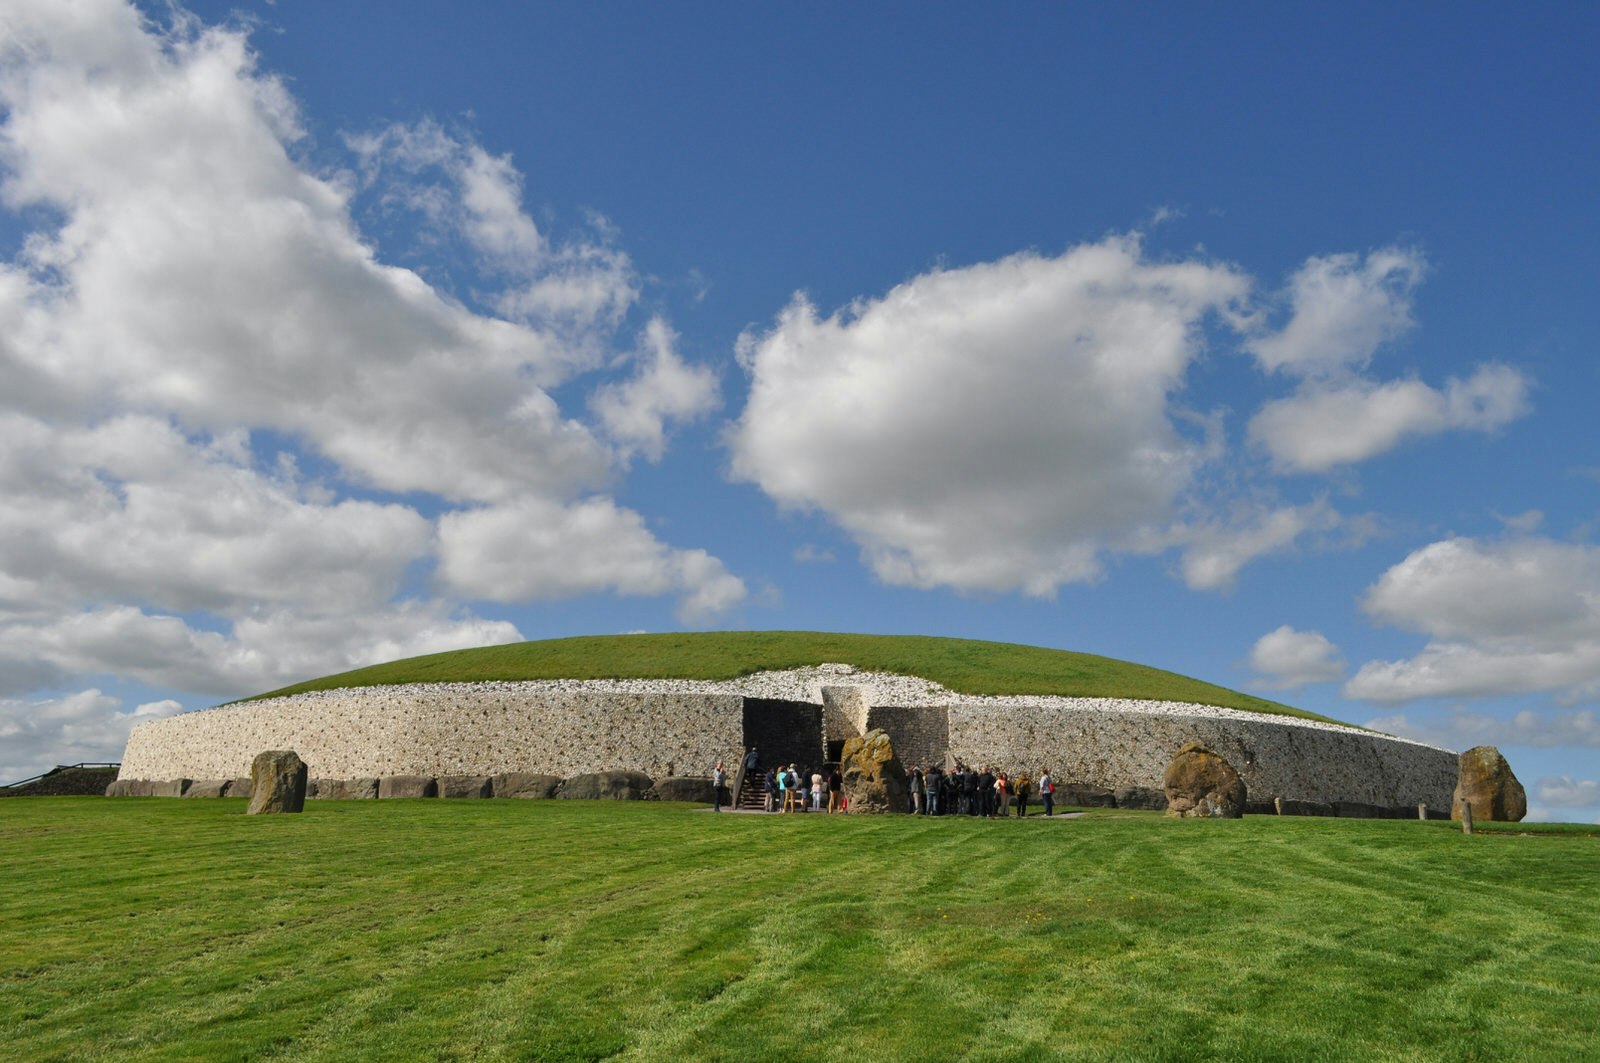 Newgrange, a prehistoric monument with a passage grave in Meath, Ireland. It is a clear day with a few fluffy clouds dotted in the blue sky. 